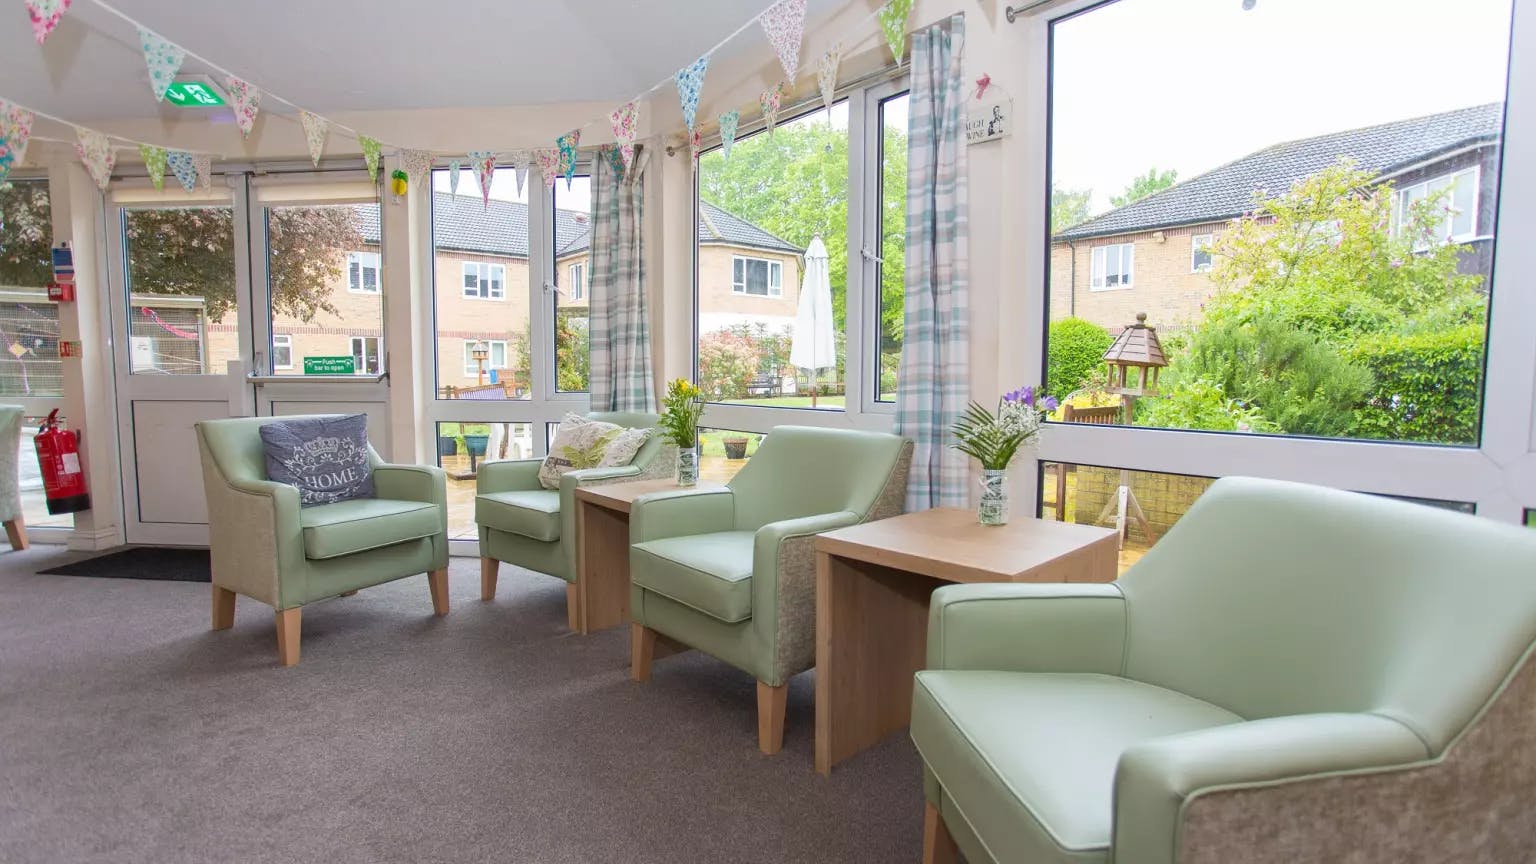 Lounge of Fosse House care home in St Albans, Hertfordshire